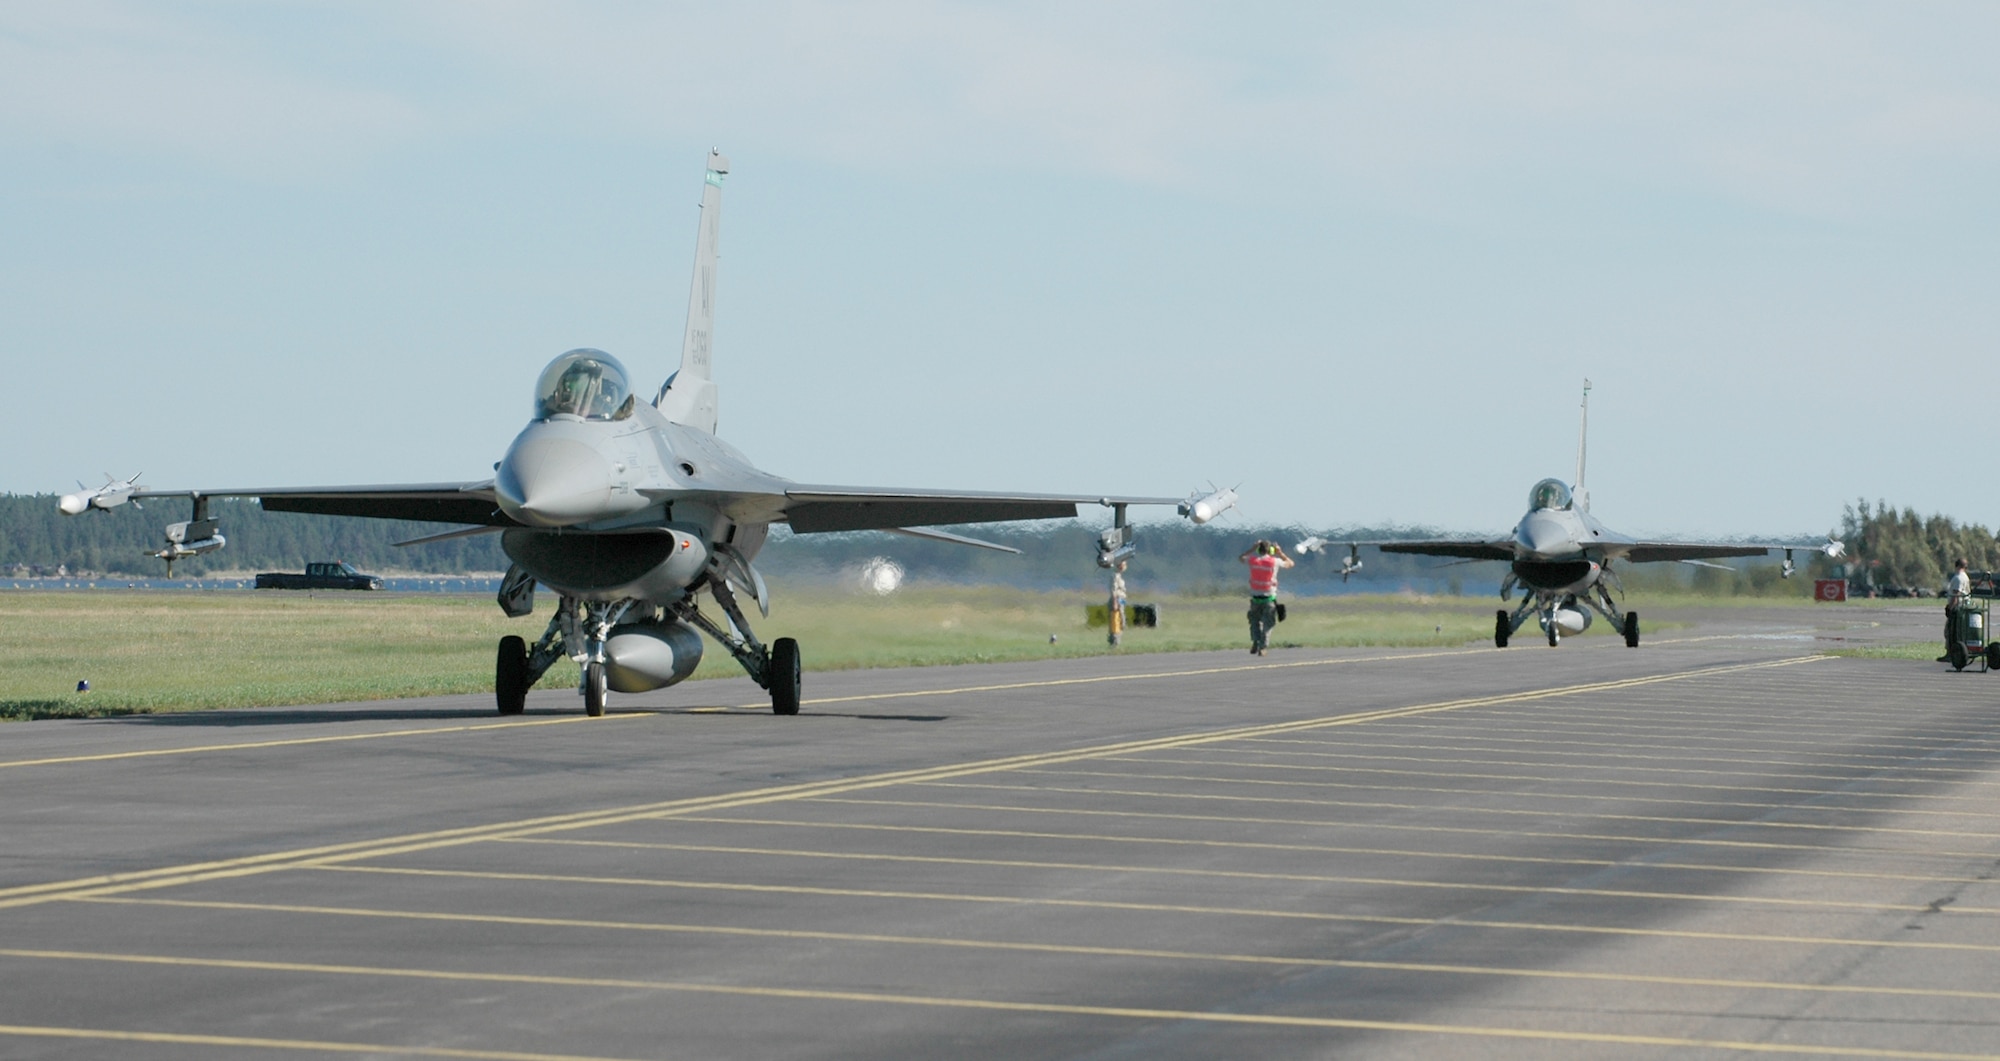 Two Aviano F-16 Fighting Falcons taxi down the runway after conducting an air-to-ground flying mission Aug. 5, 2010, at Kallax Air Base, Sweden. More than 250 Airmen from the 555th Fighter Squadron and 31st Aircraft Maintenance Squadron traveled to the Swedish air base on July 30, 2010 for a two week exercise conducting air-to-air and air-to-ground flying missions alongside Swedish air force members assigned to Norrbotten Wing. (U.S. Air Force photo/Tech. Sgt. Lindsey Maurice) 